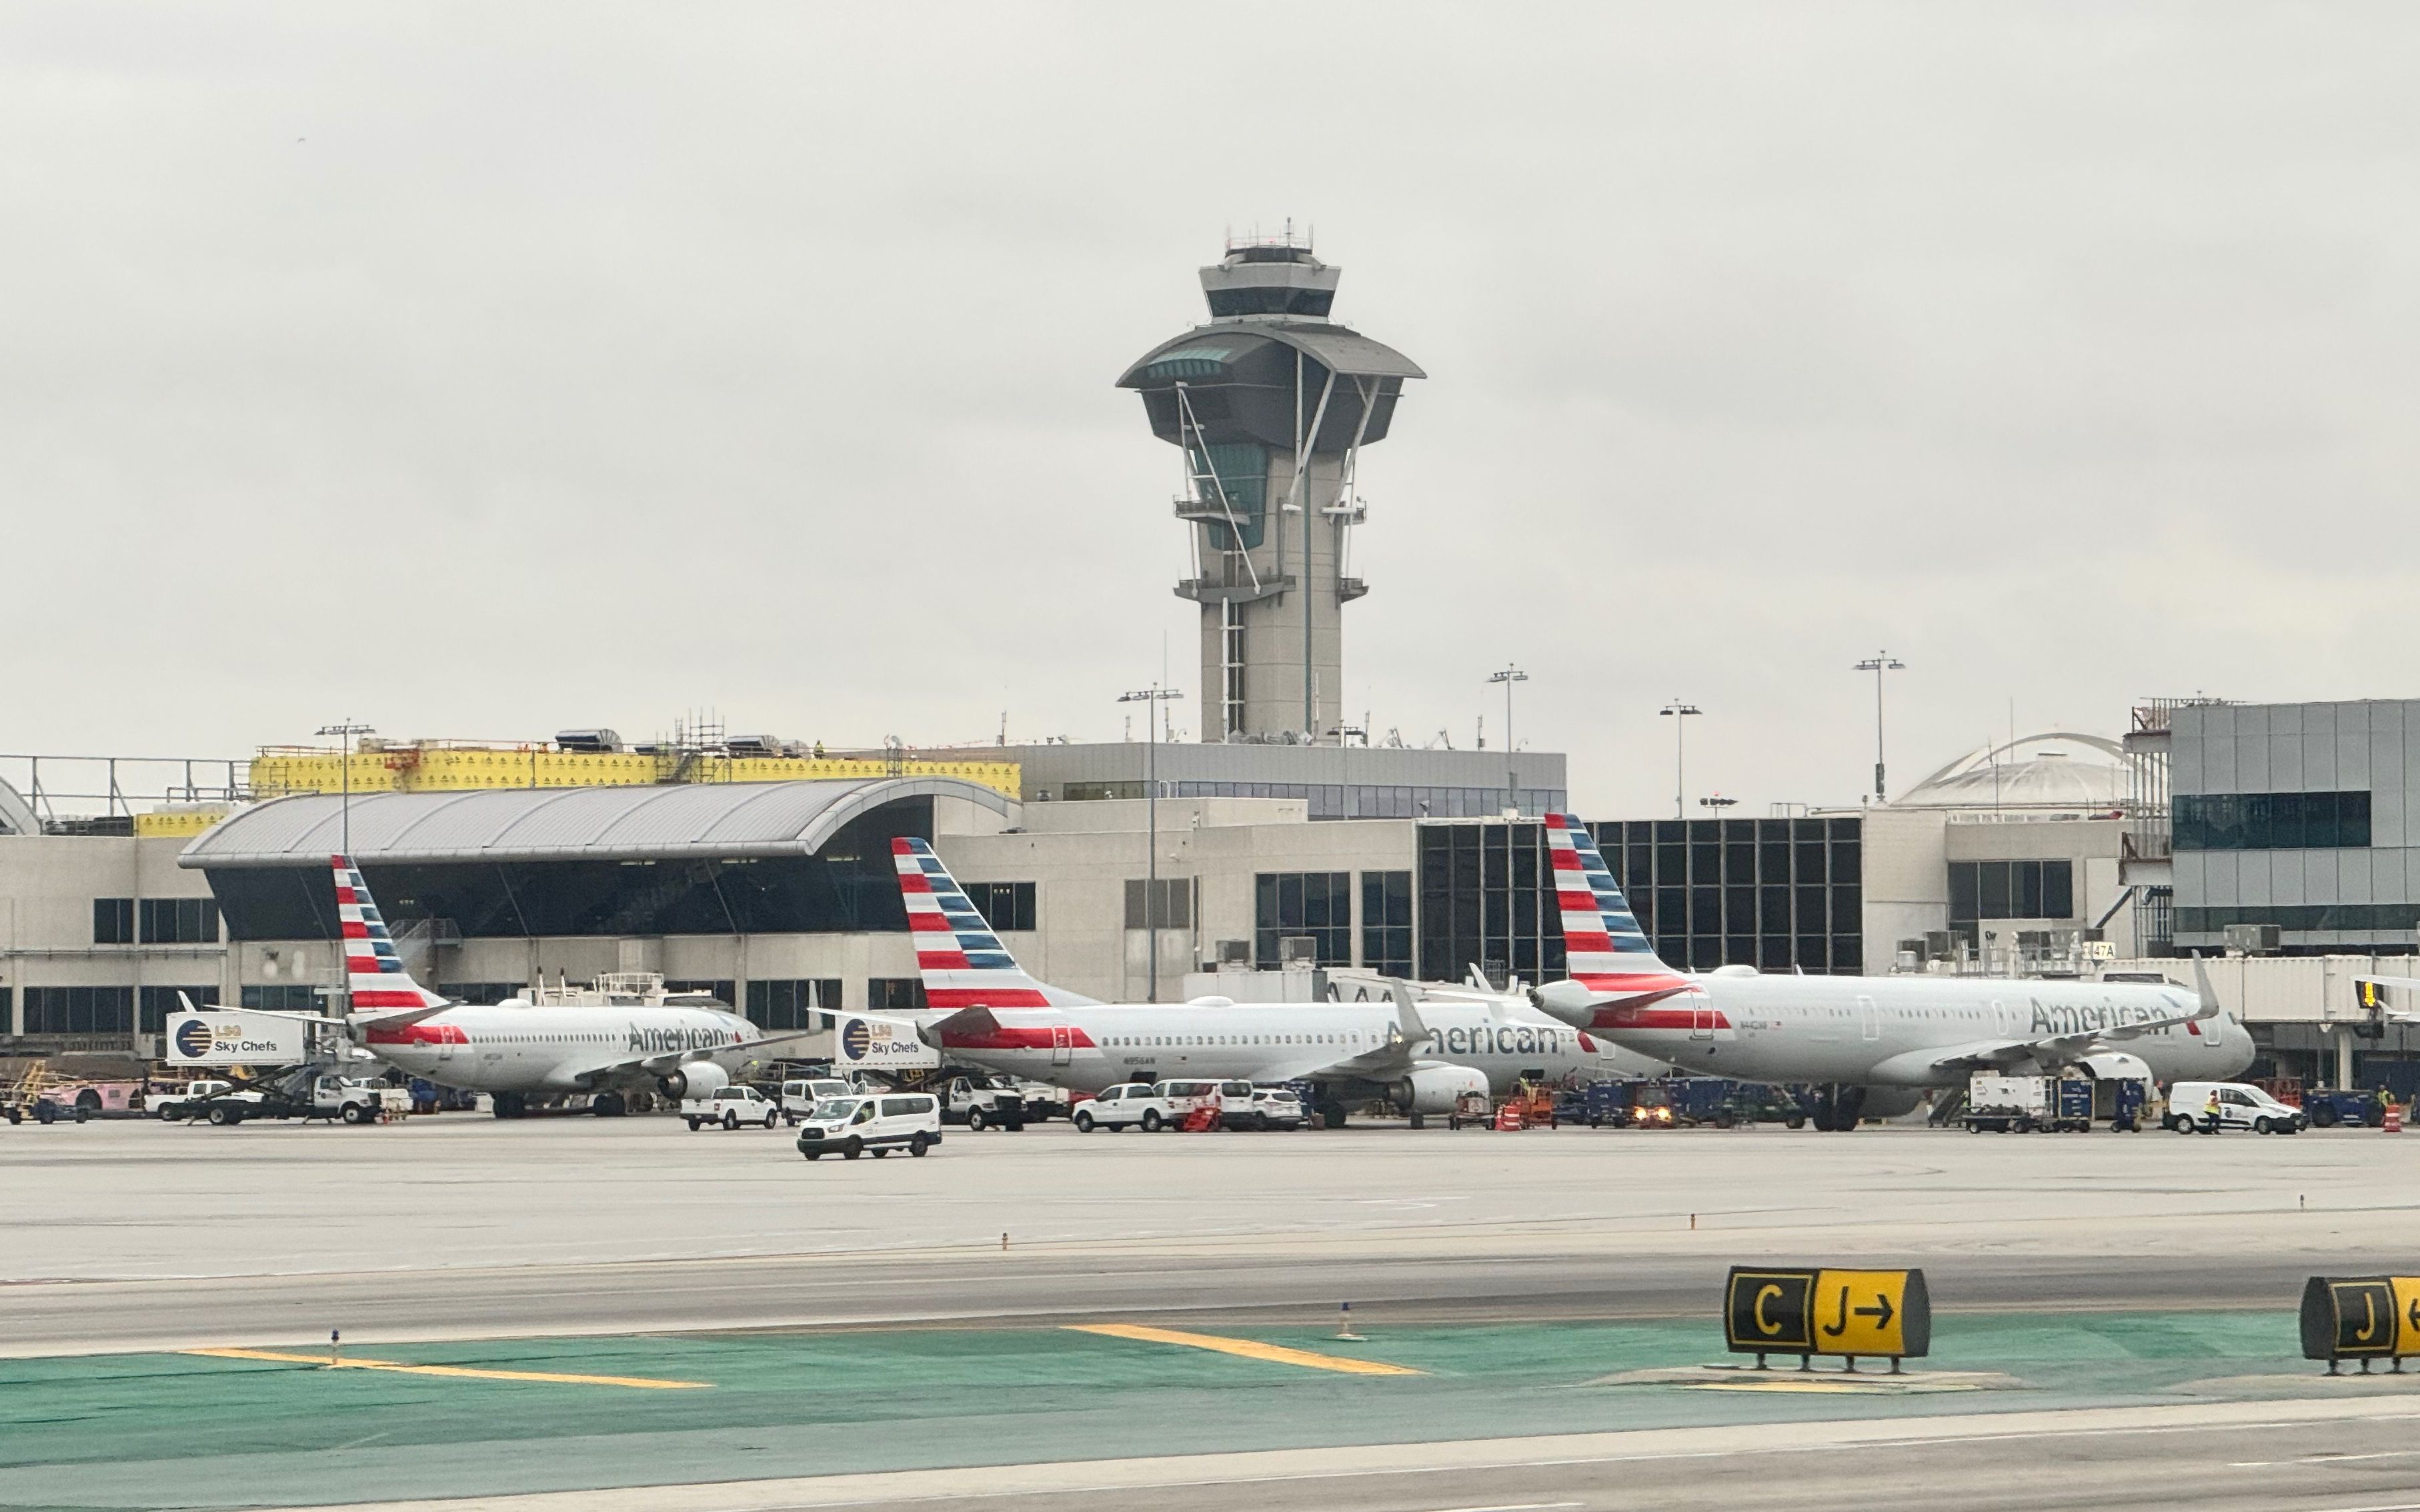 American Airlines planes at LAX